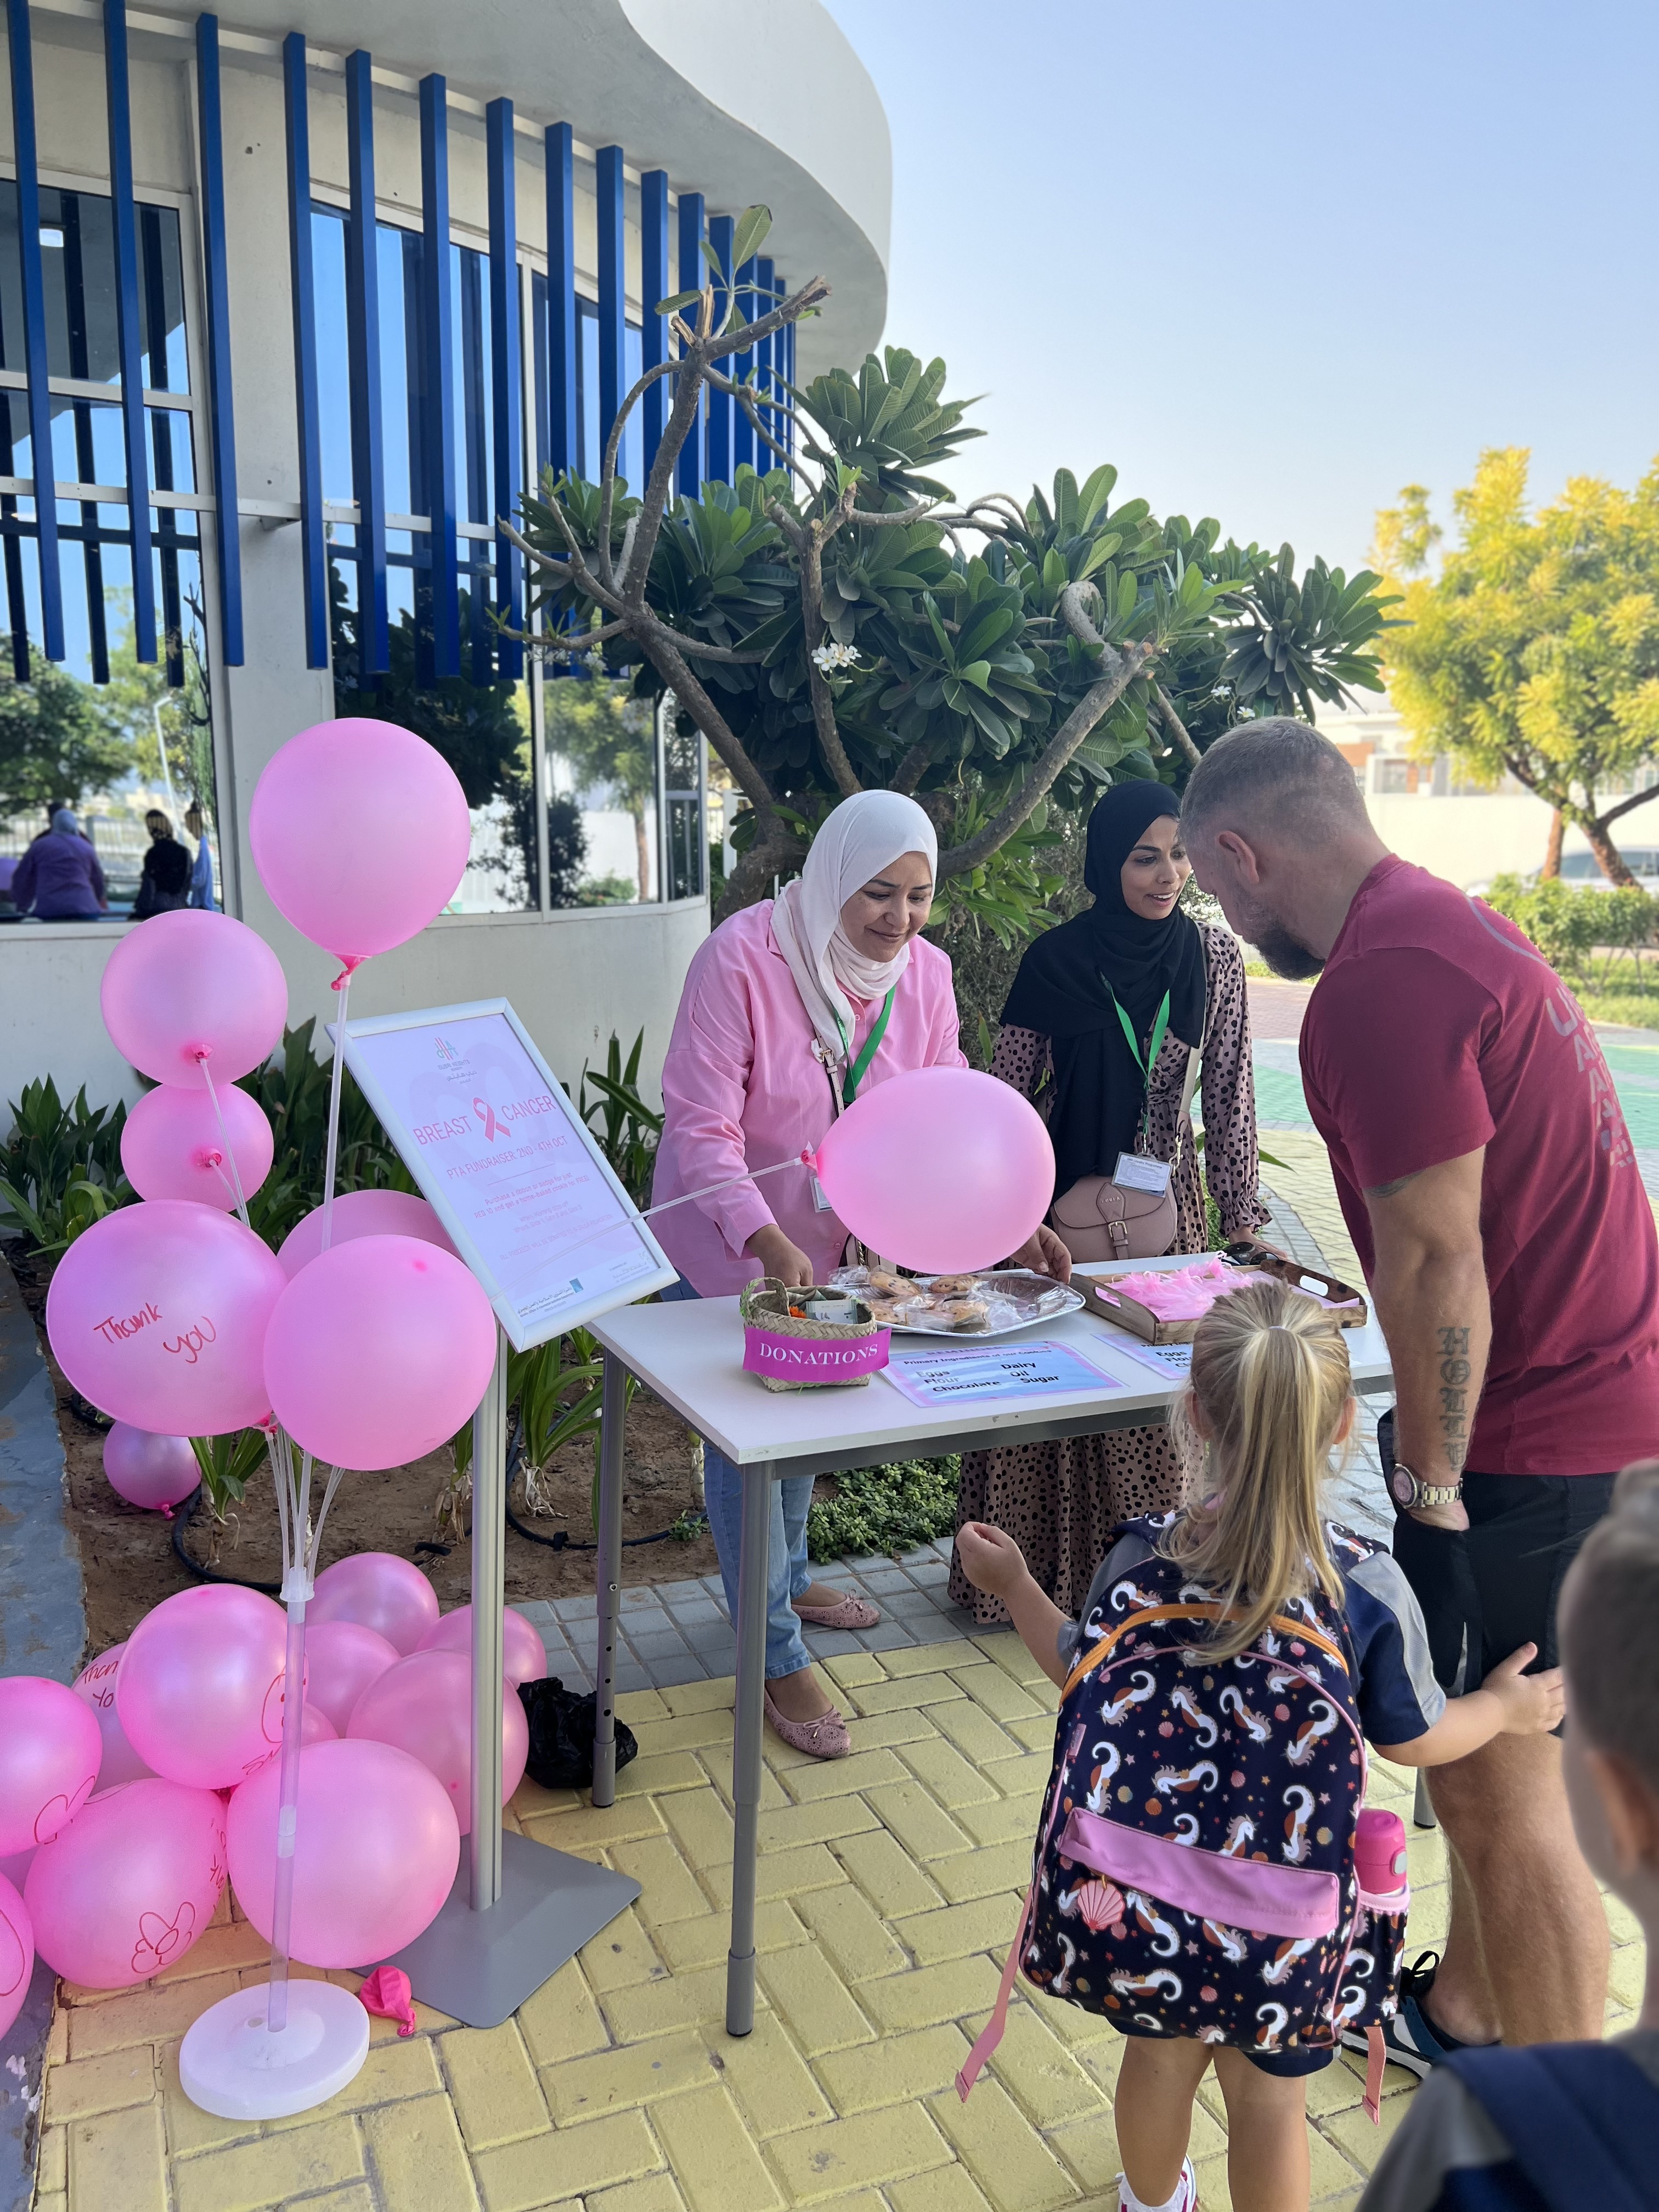 Dubai Heights Academy paints the town pink with generous donations for Pinktober